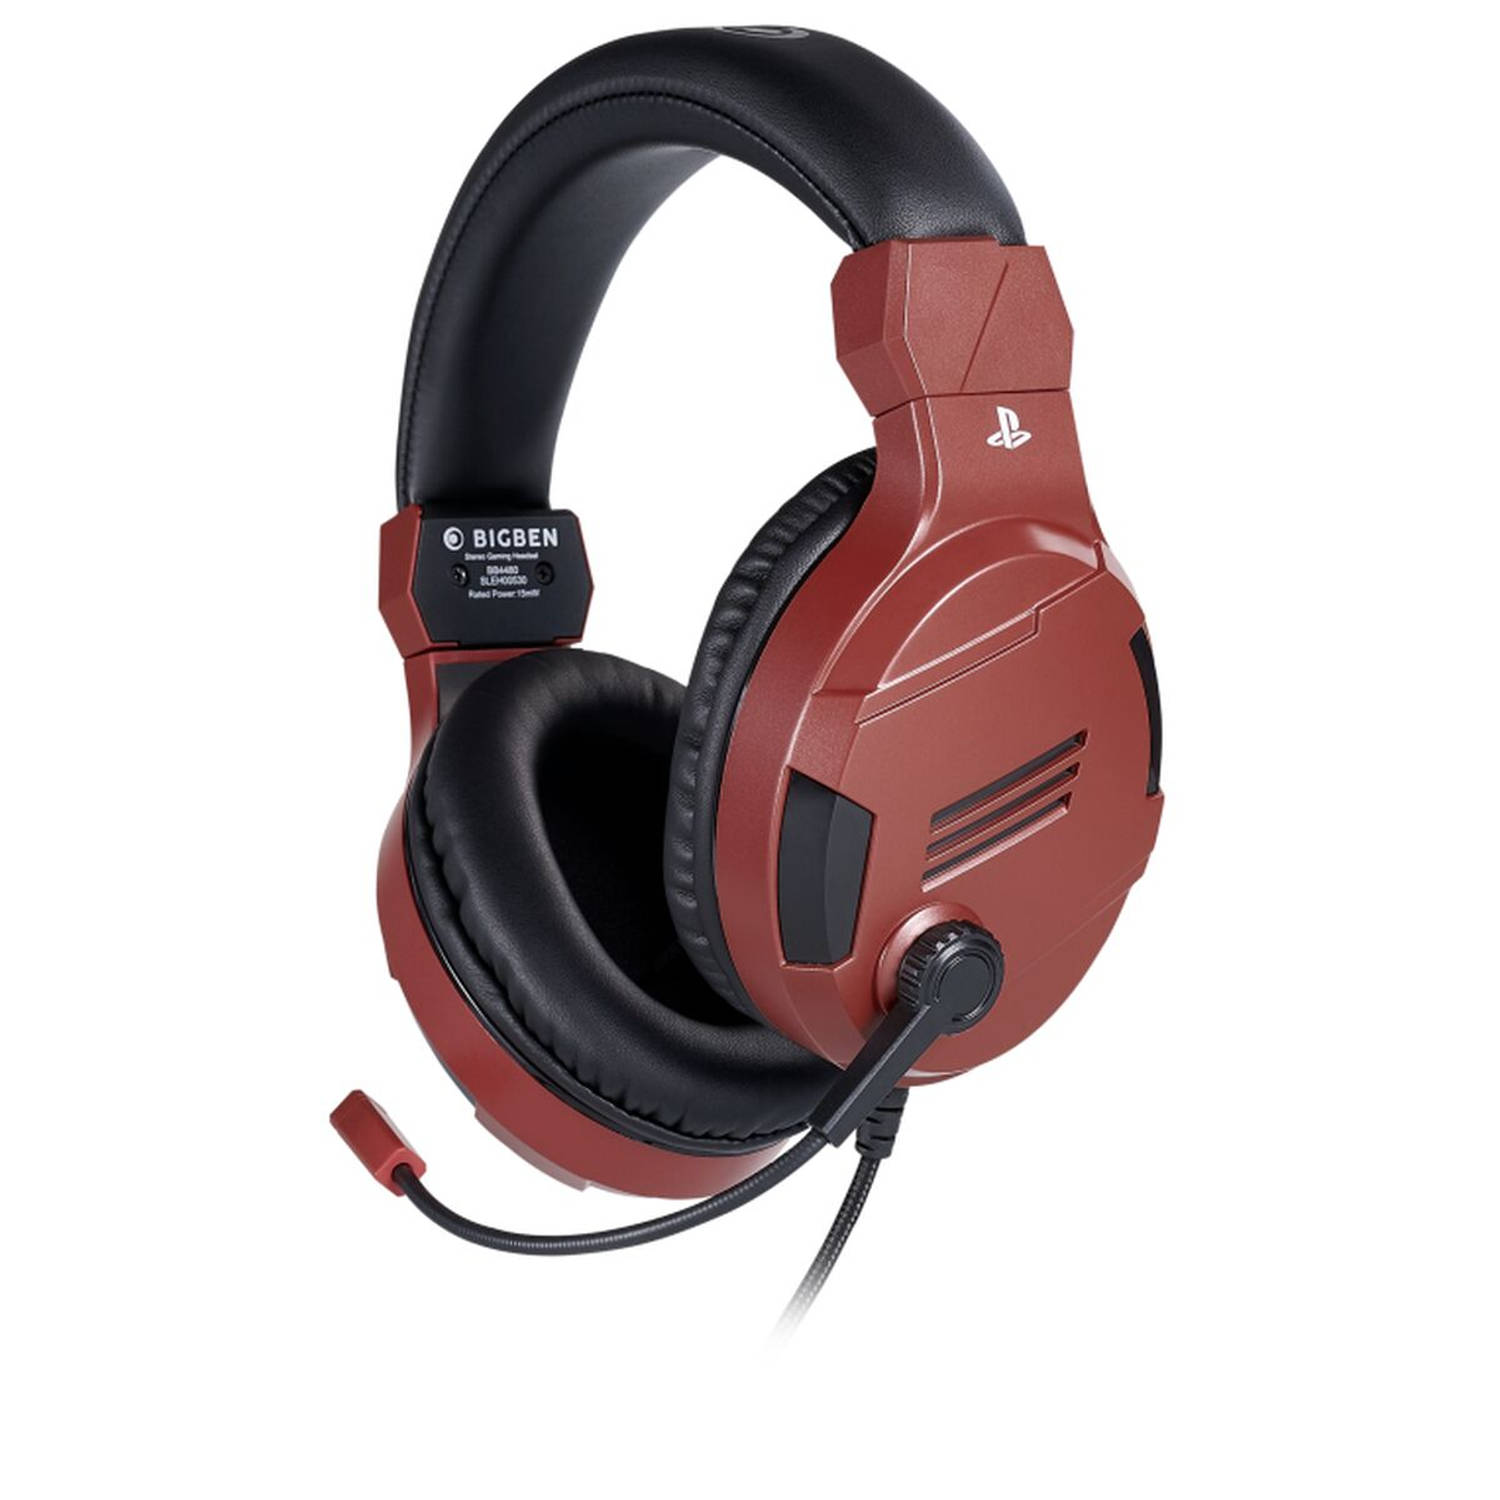 BIGBEN PS4 Stereo Gaming Headset V3 Rood